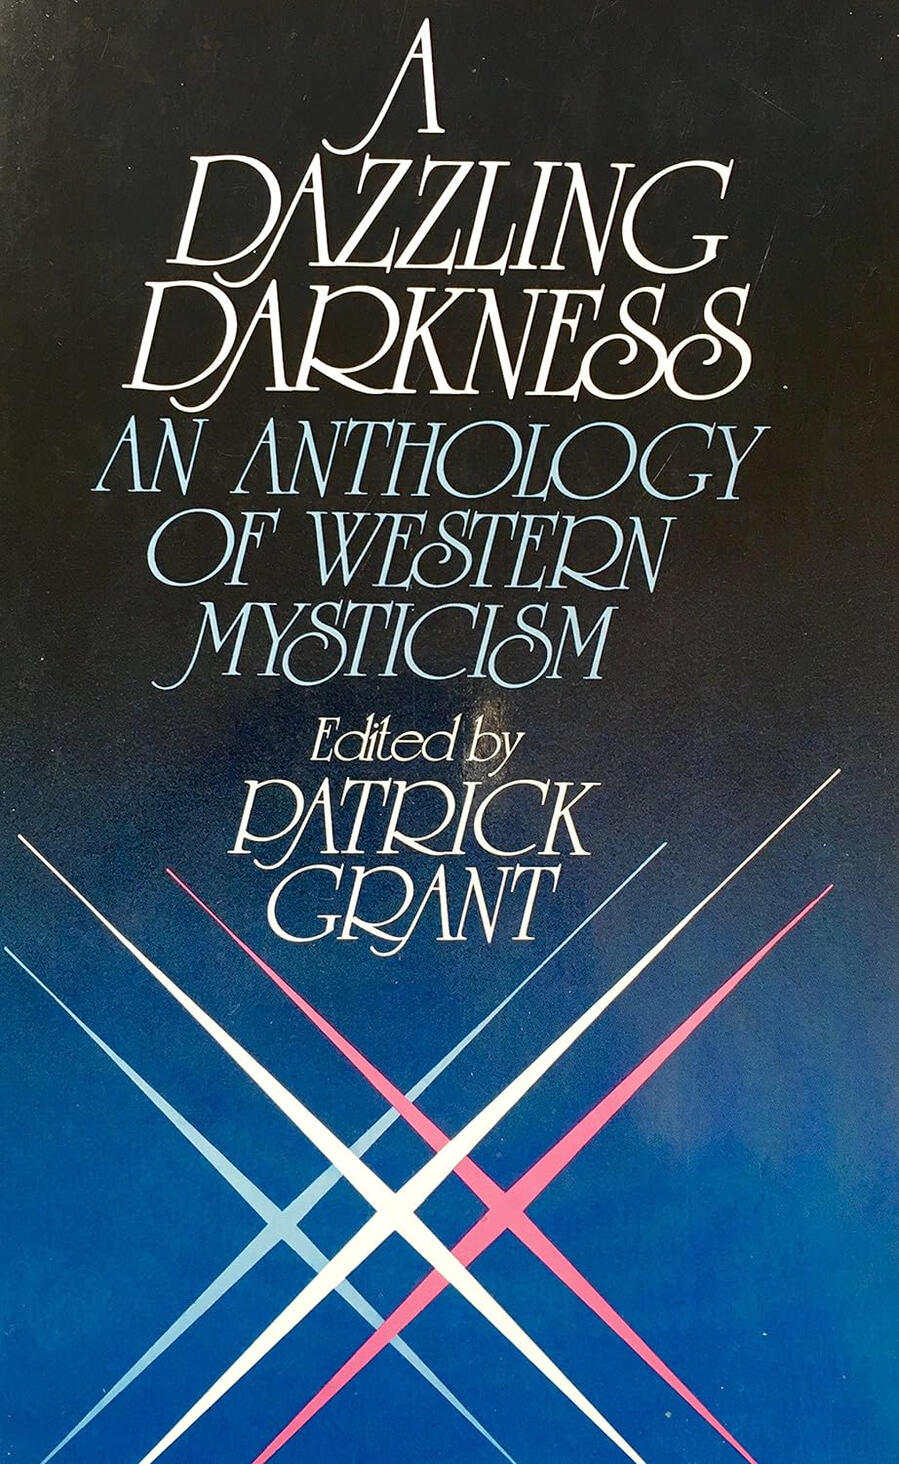 A Dazzling Darkness, An Anthology of Western Mysticism